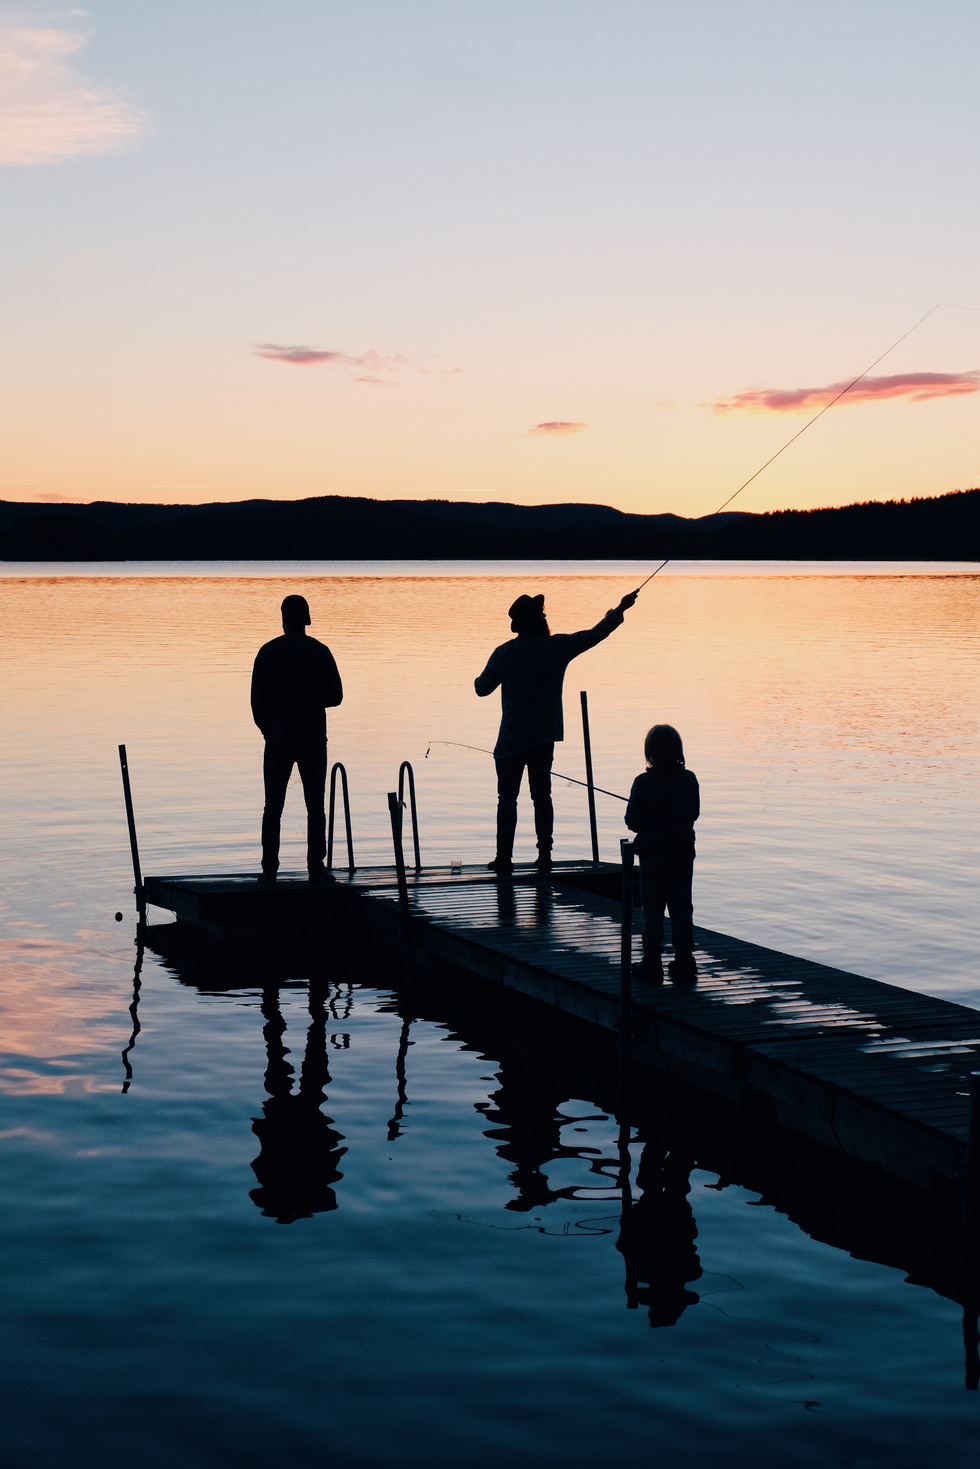 A family on a boat doat at sunset